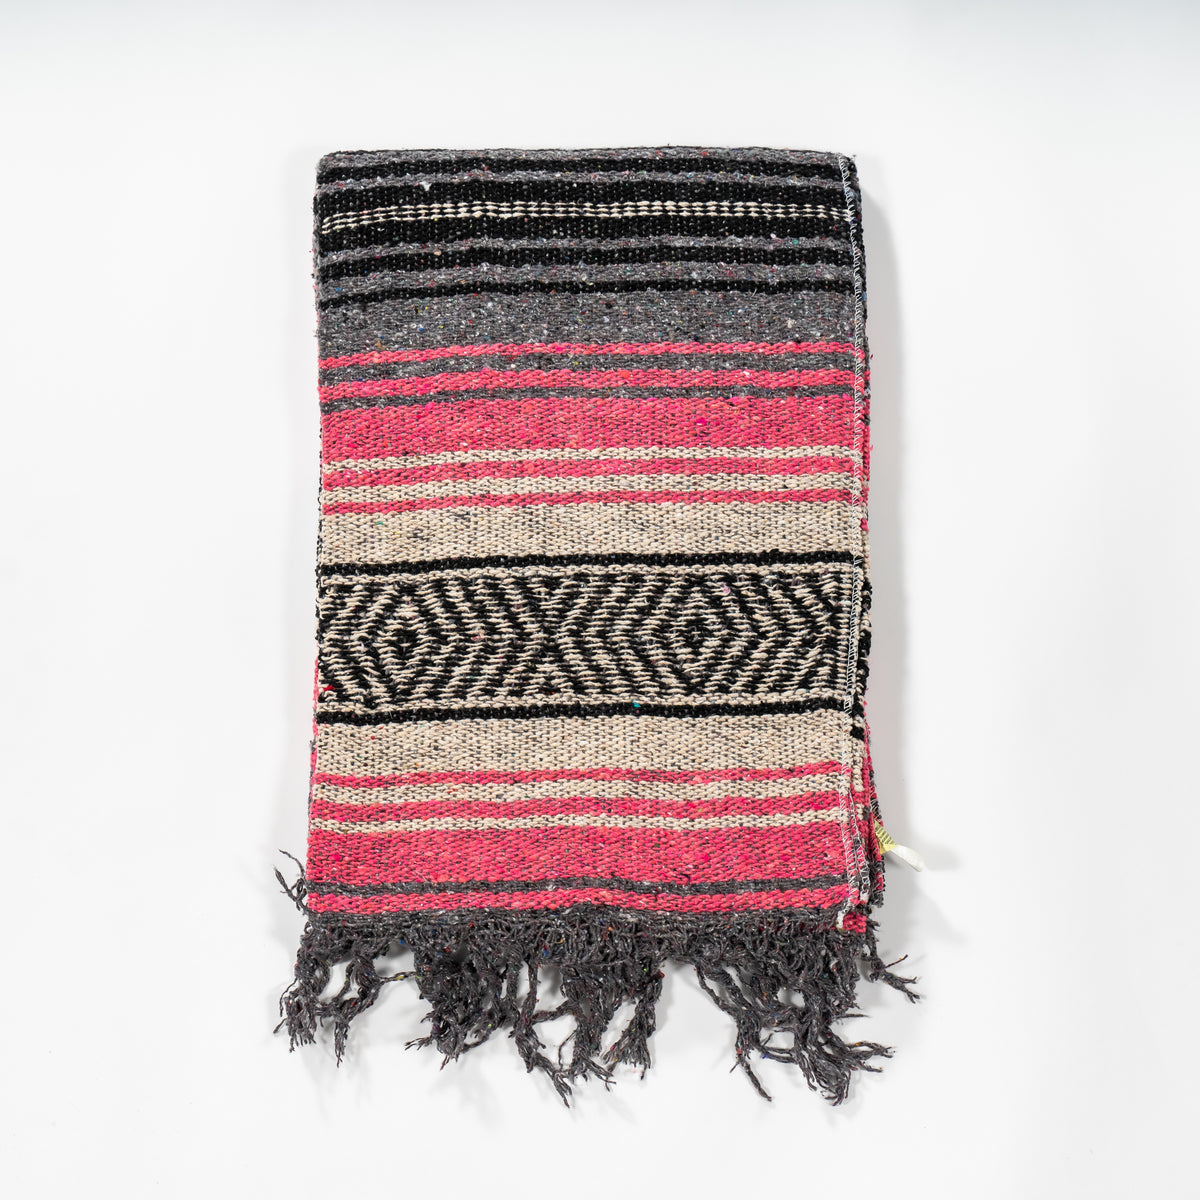 Hand-Woven Mexican Blanket